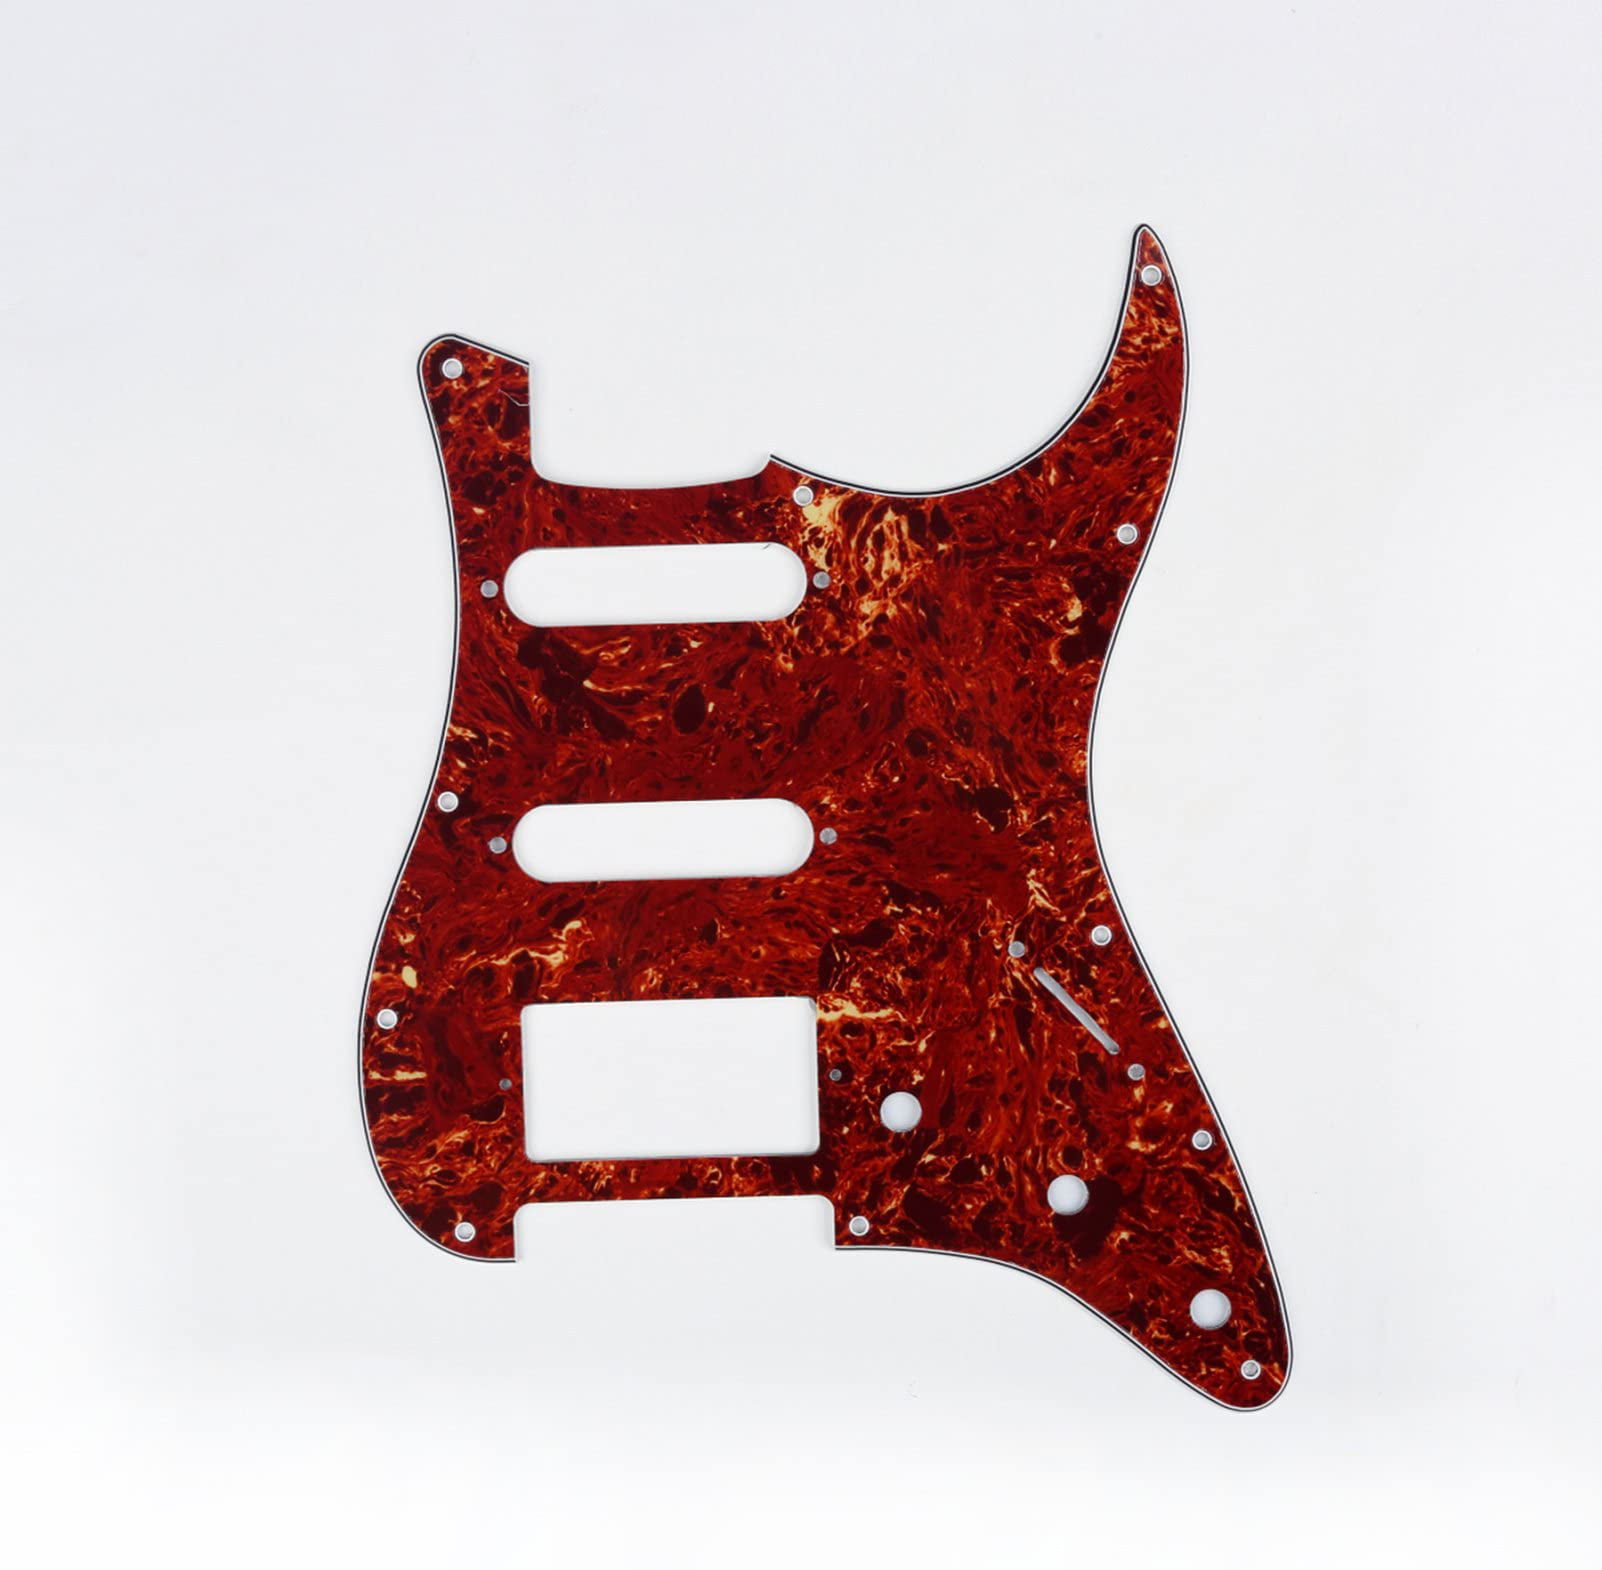 4Ply Brown Tortoise IKN SSS 11 Holes Strat Pickguard and Tremolo Cover Backplate Set for FD US/Mexico Style Standard Strat Guitar Parts